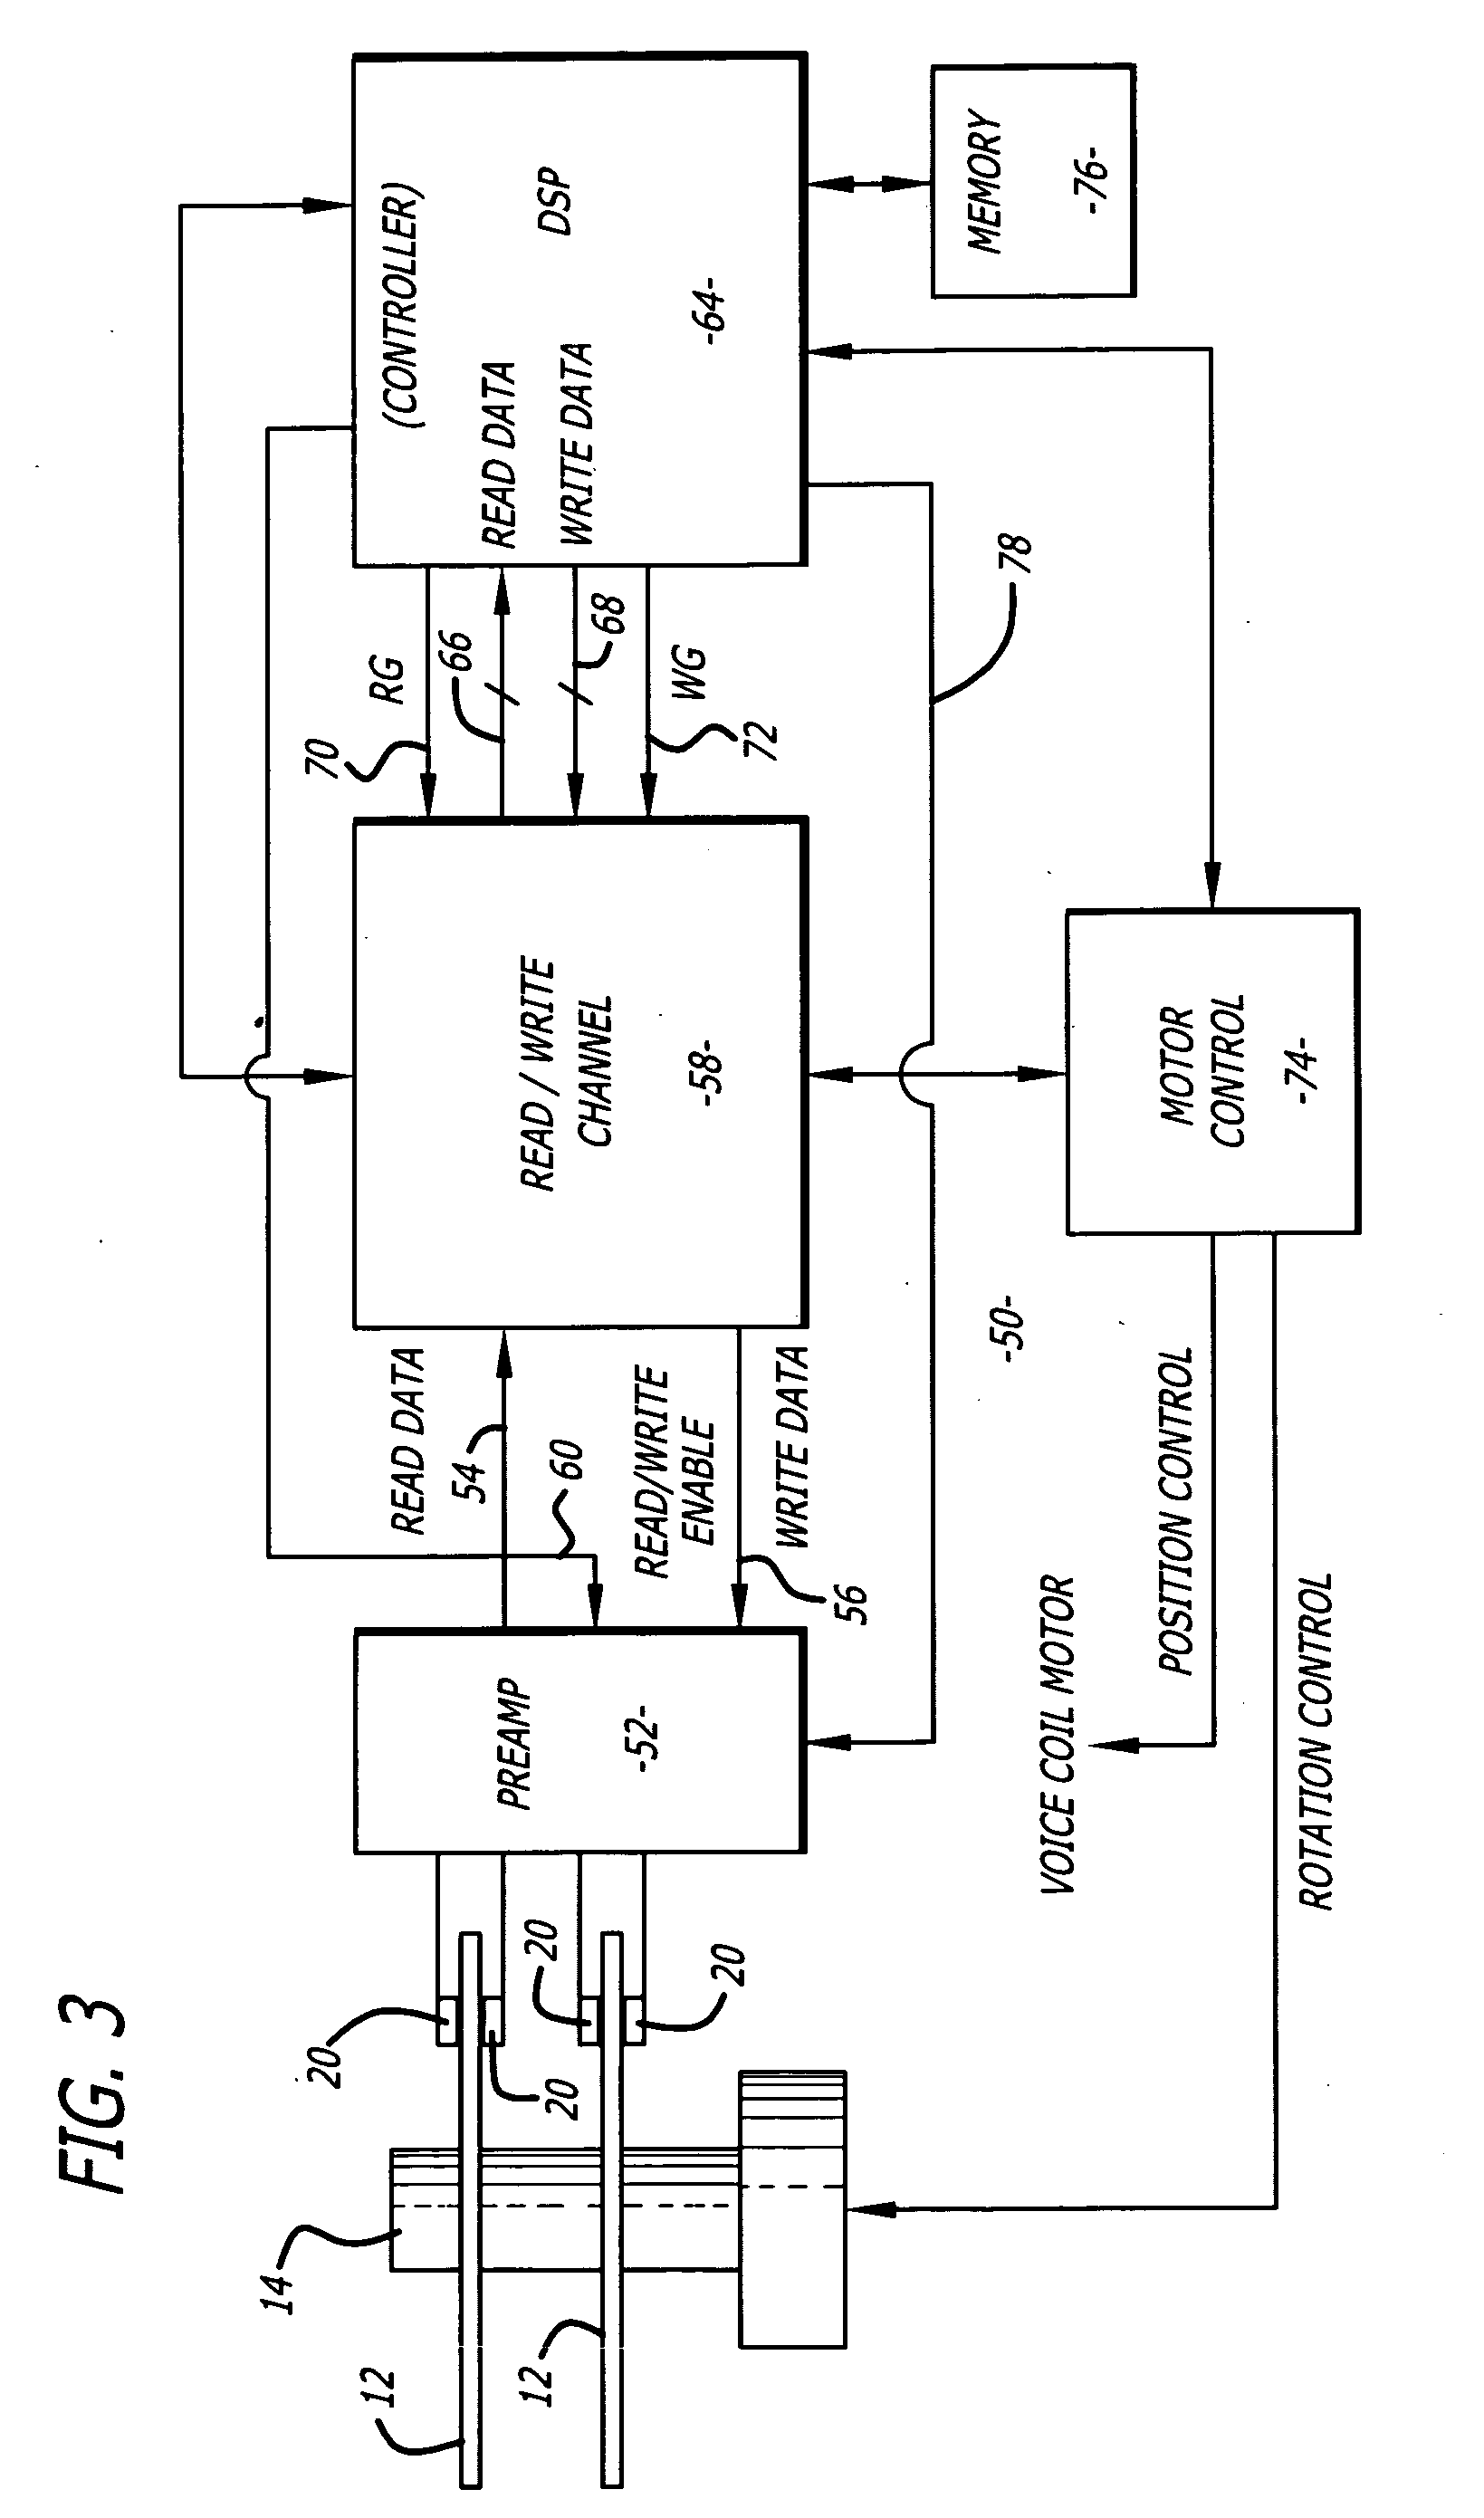 Hard disk drive tunneling magnetoresistive annealing heads with a fly on demand heater